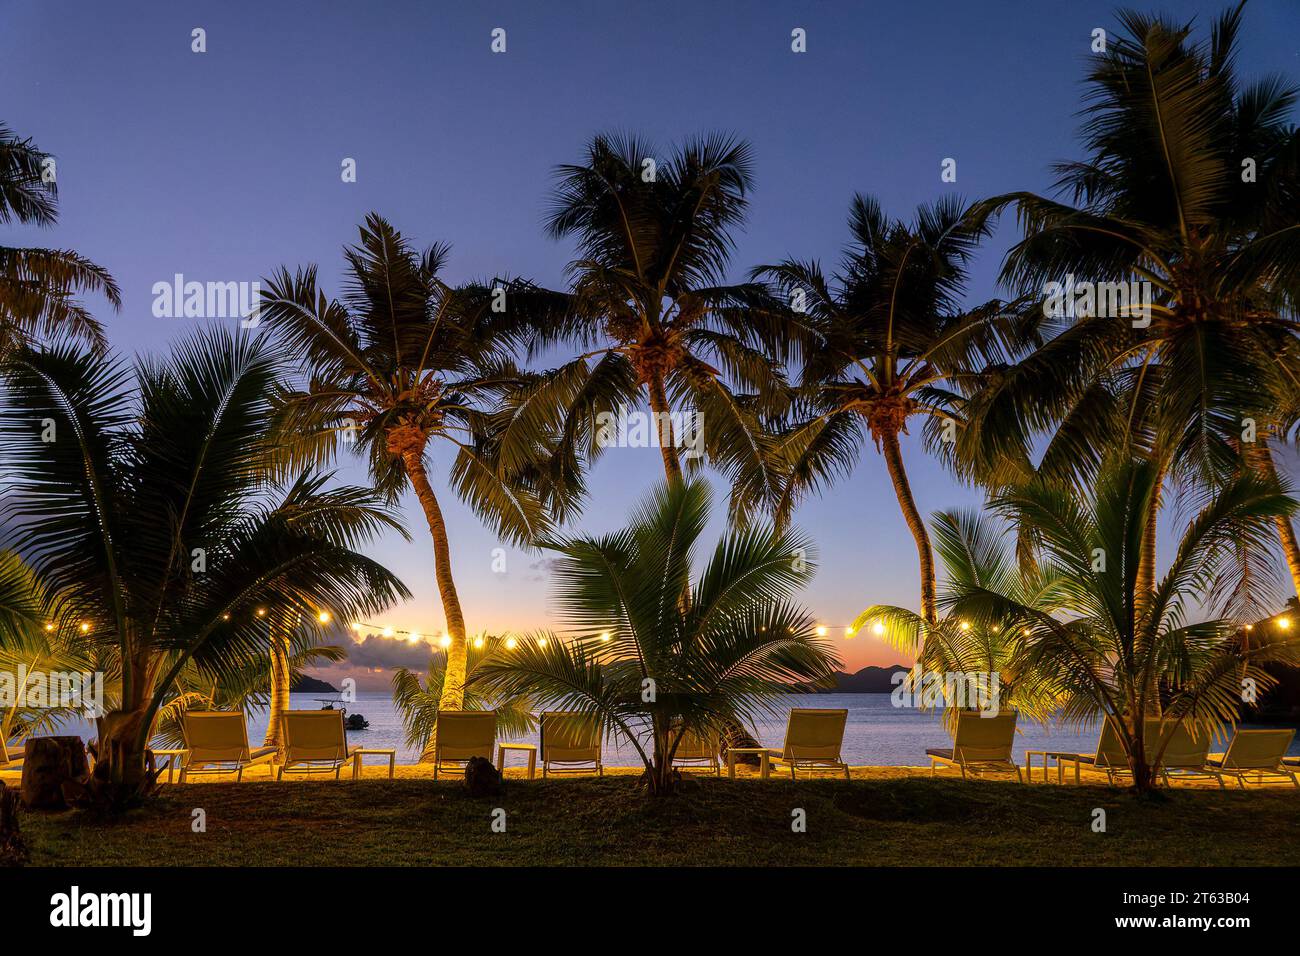 Illuminated palm trees and lounge chairs at night in Praslin island, Seychelles Stock Photo